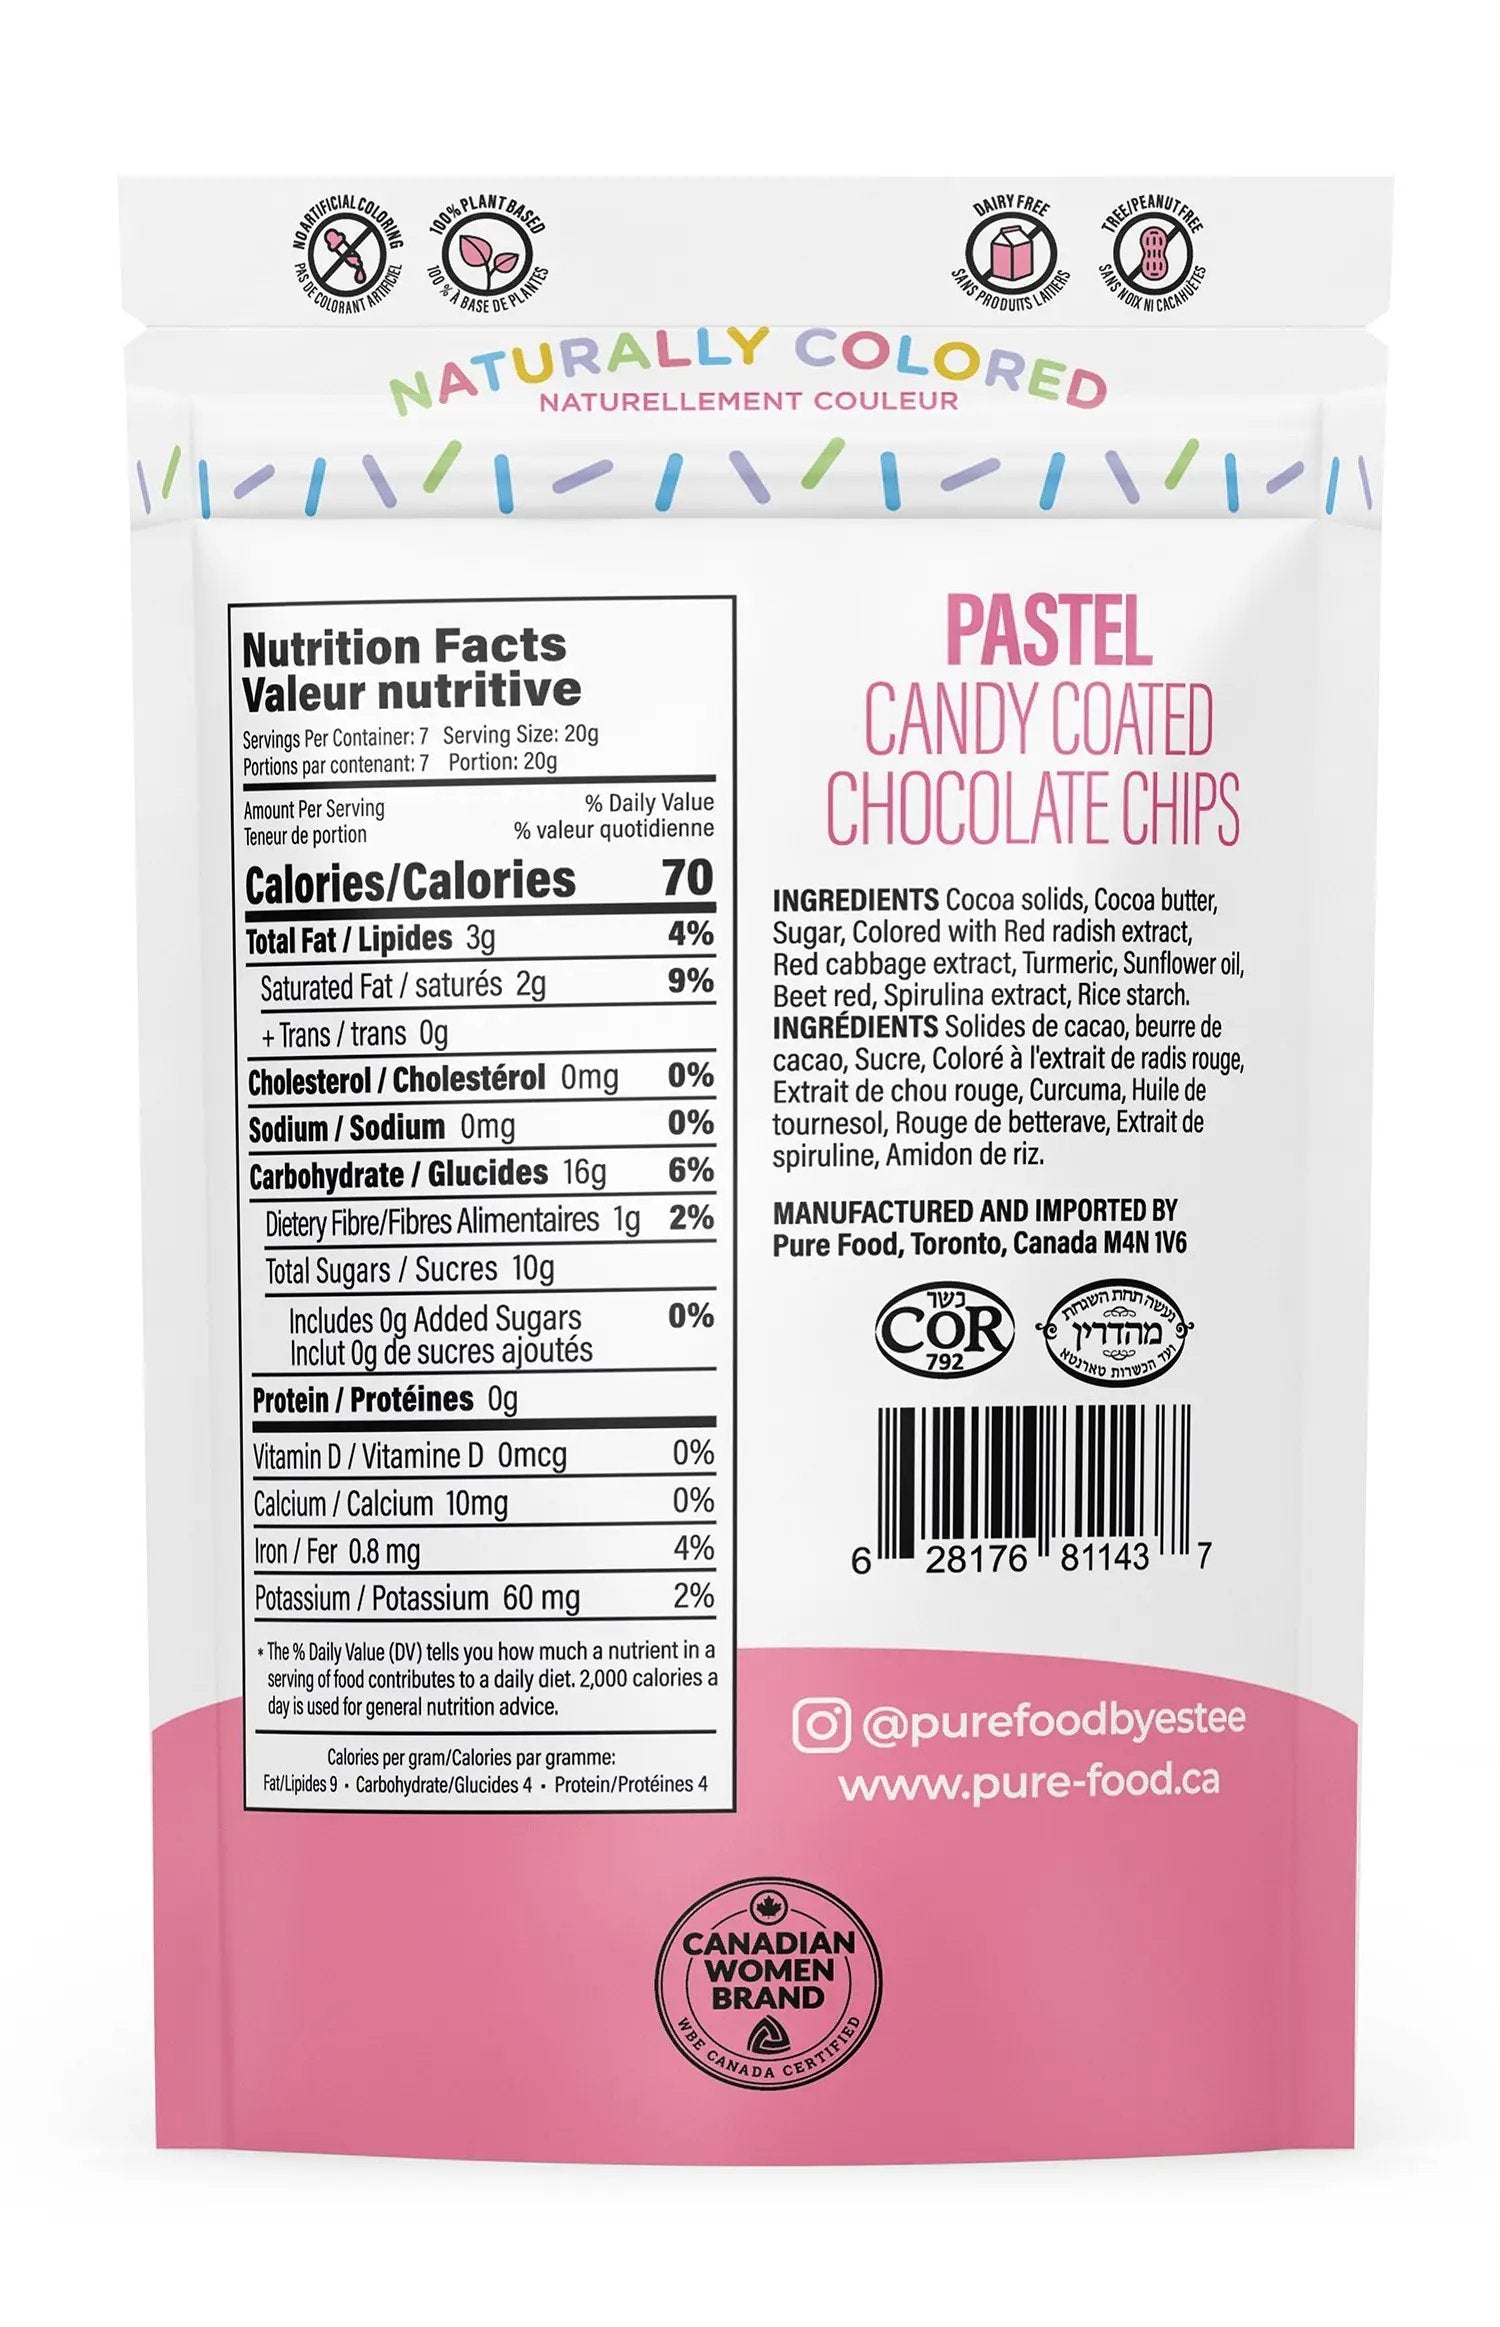 Pastel All Natural Candy Coated Mini Chocolate Chips - 5 OZ -  Case of 12